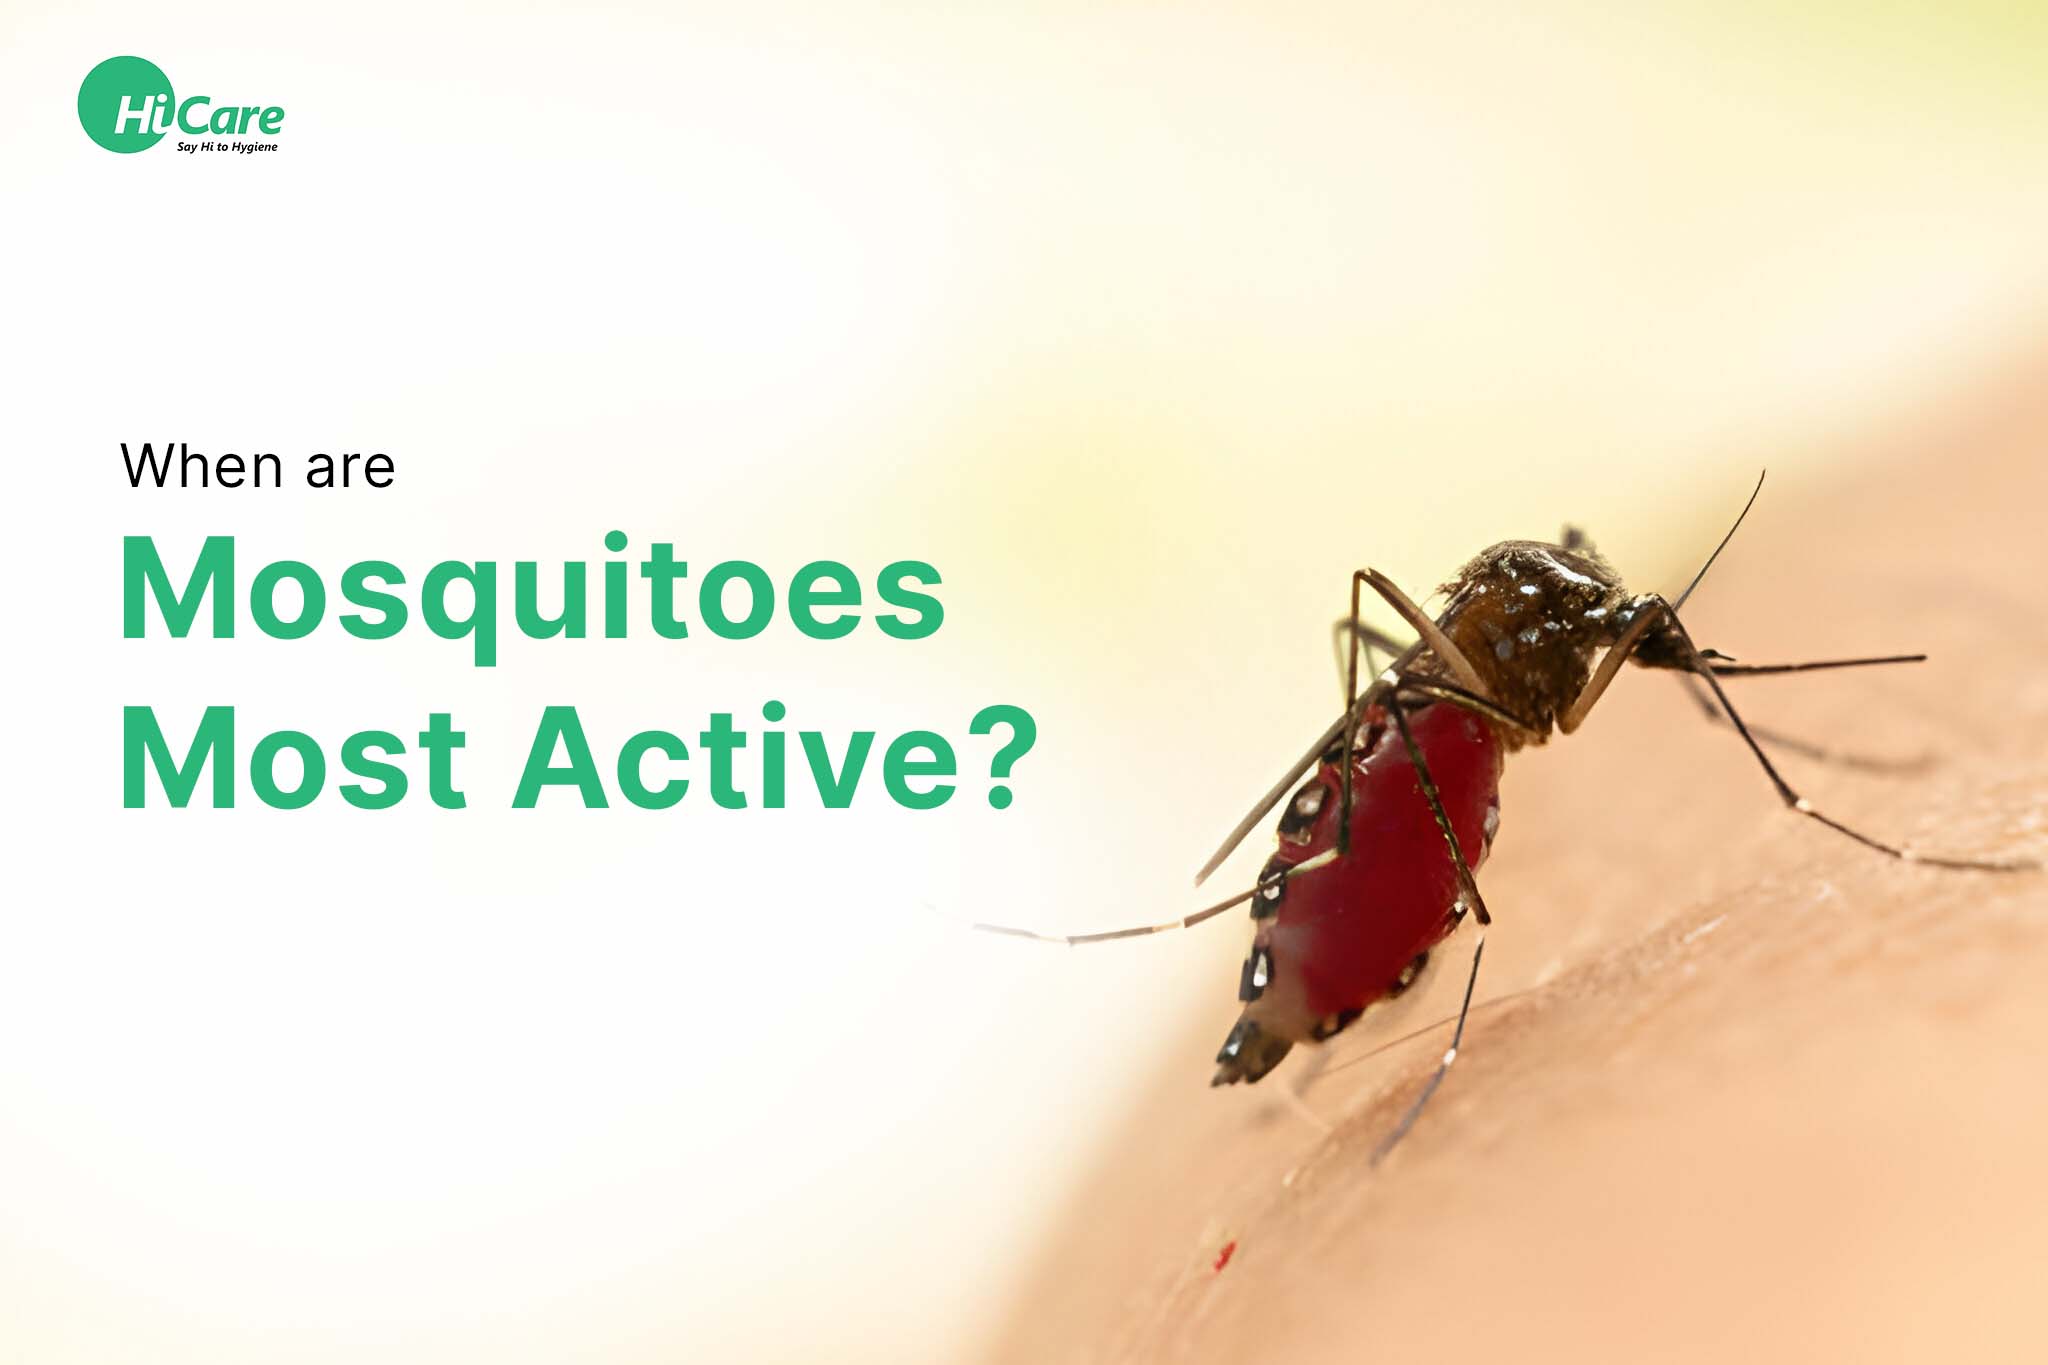 When Are Mosquitoes Most Active?